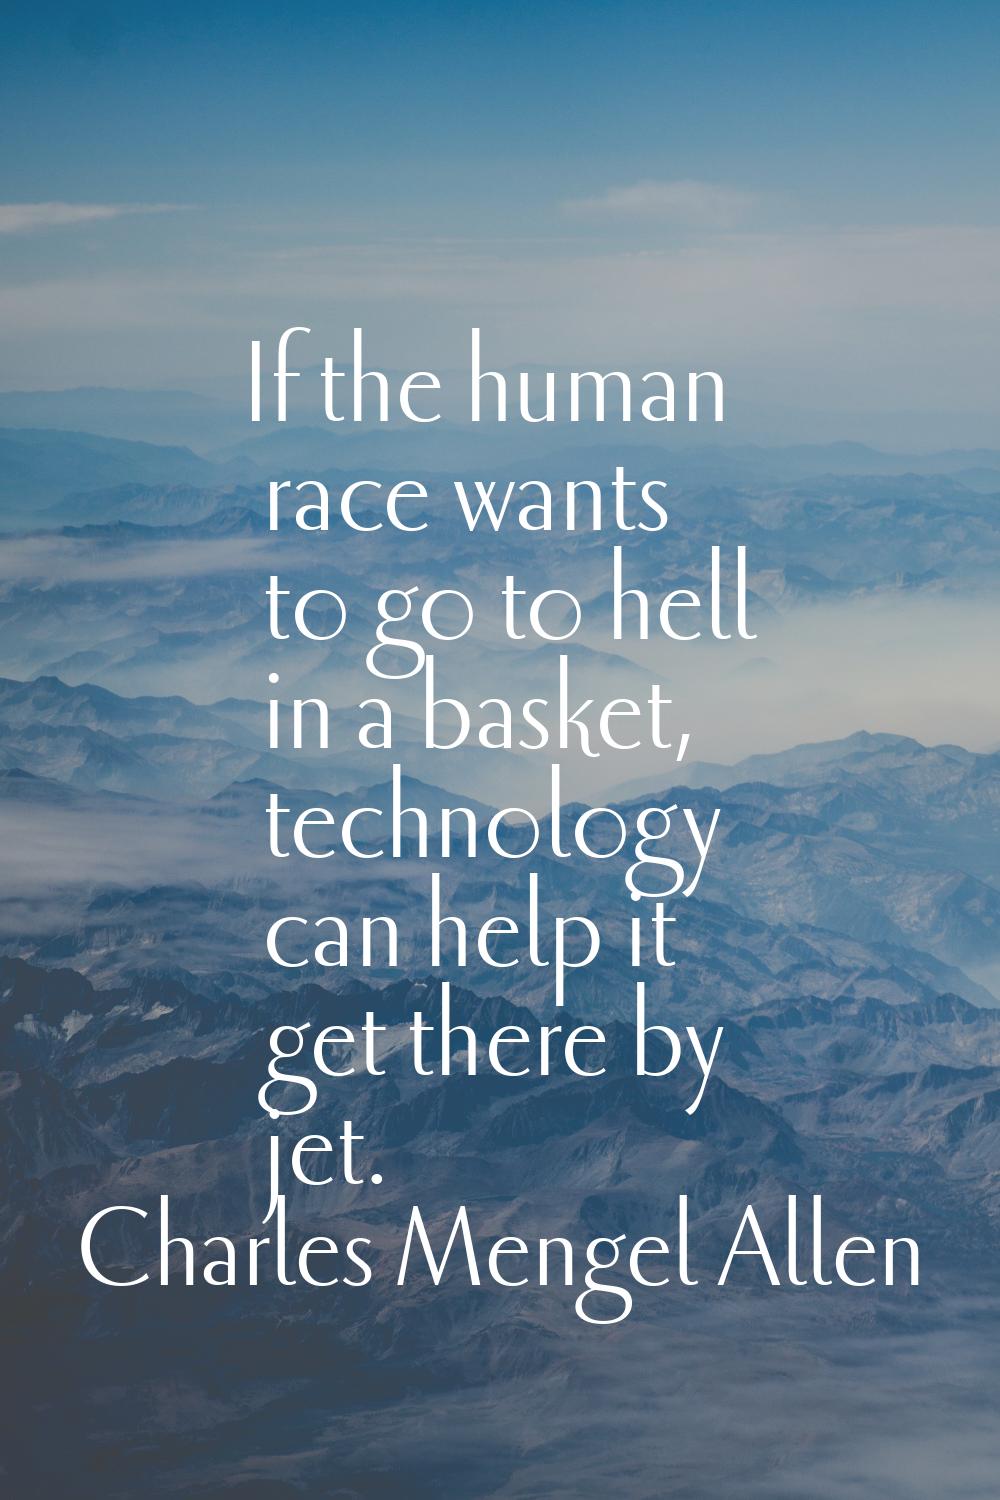 If the human race wants to go to hell in a basket, technology can help it get there by jet.